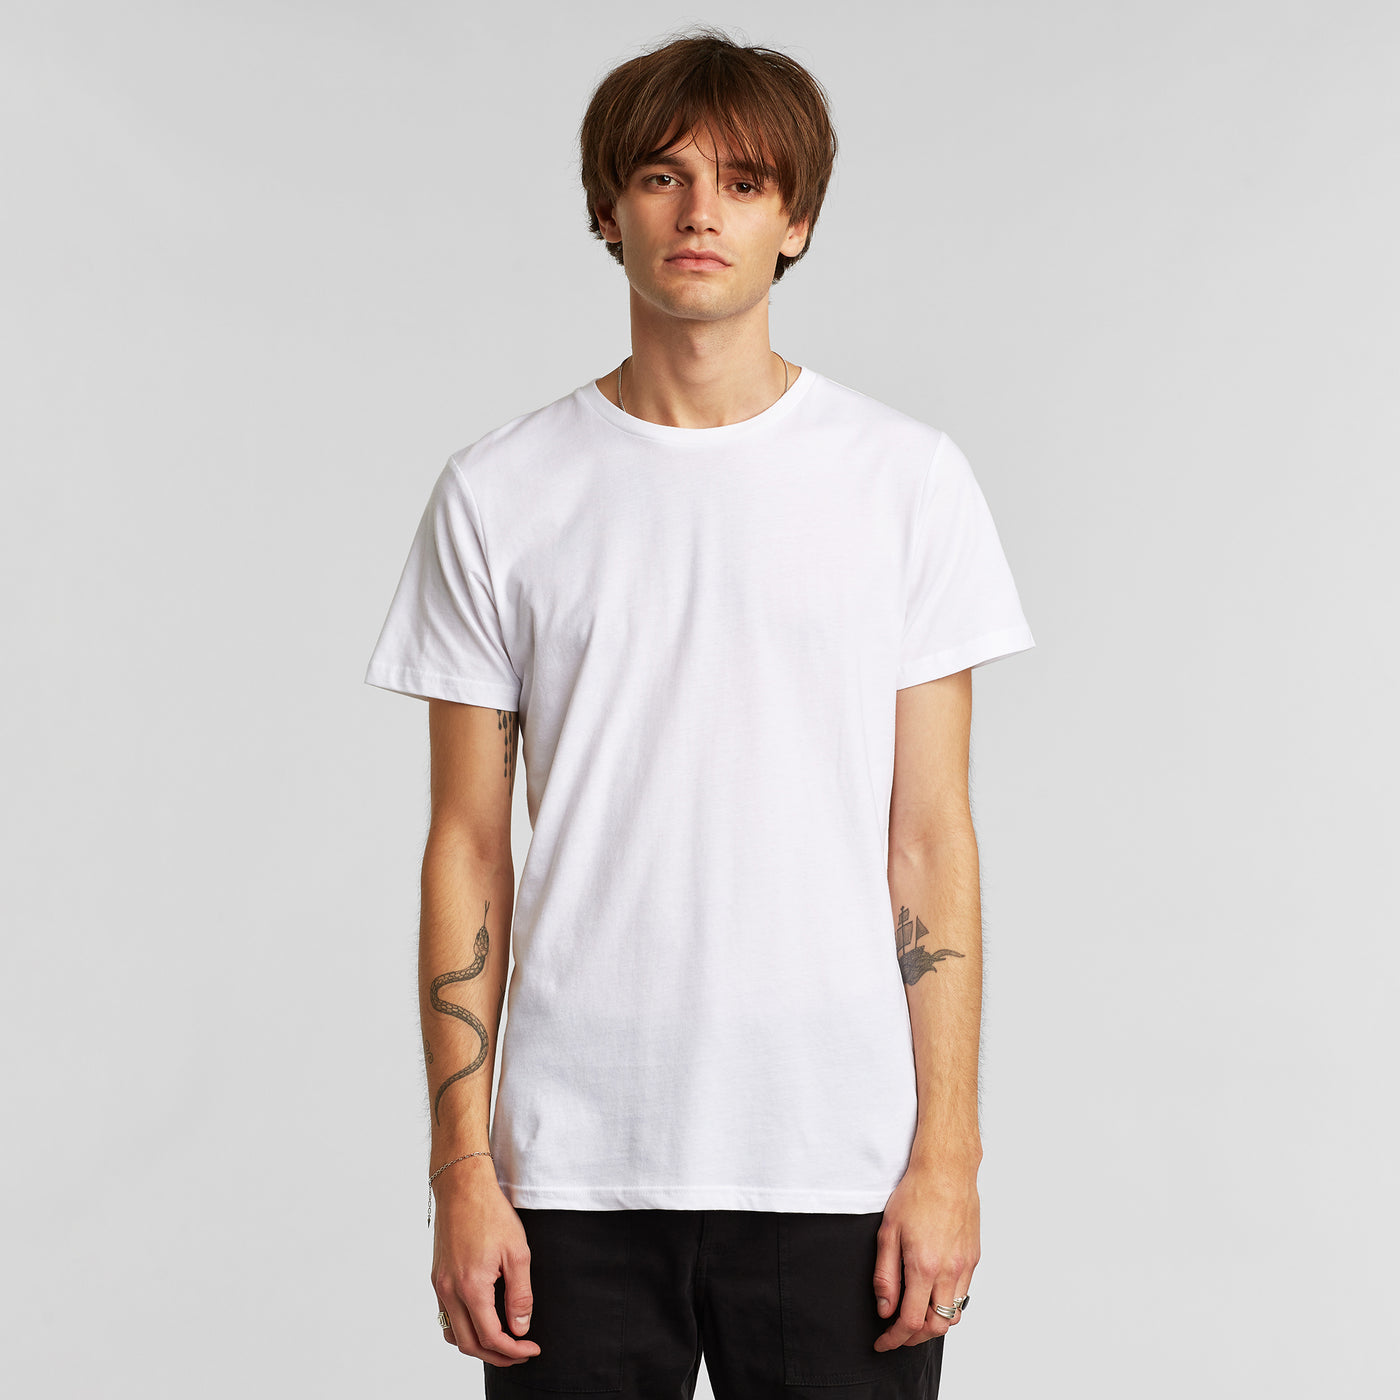 T-ShirtStockholm Base 3-Pack White in weiß.